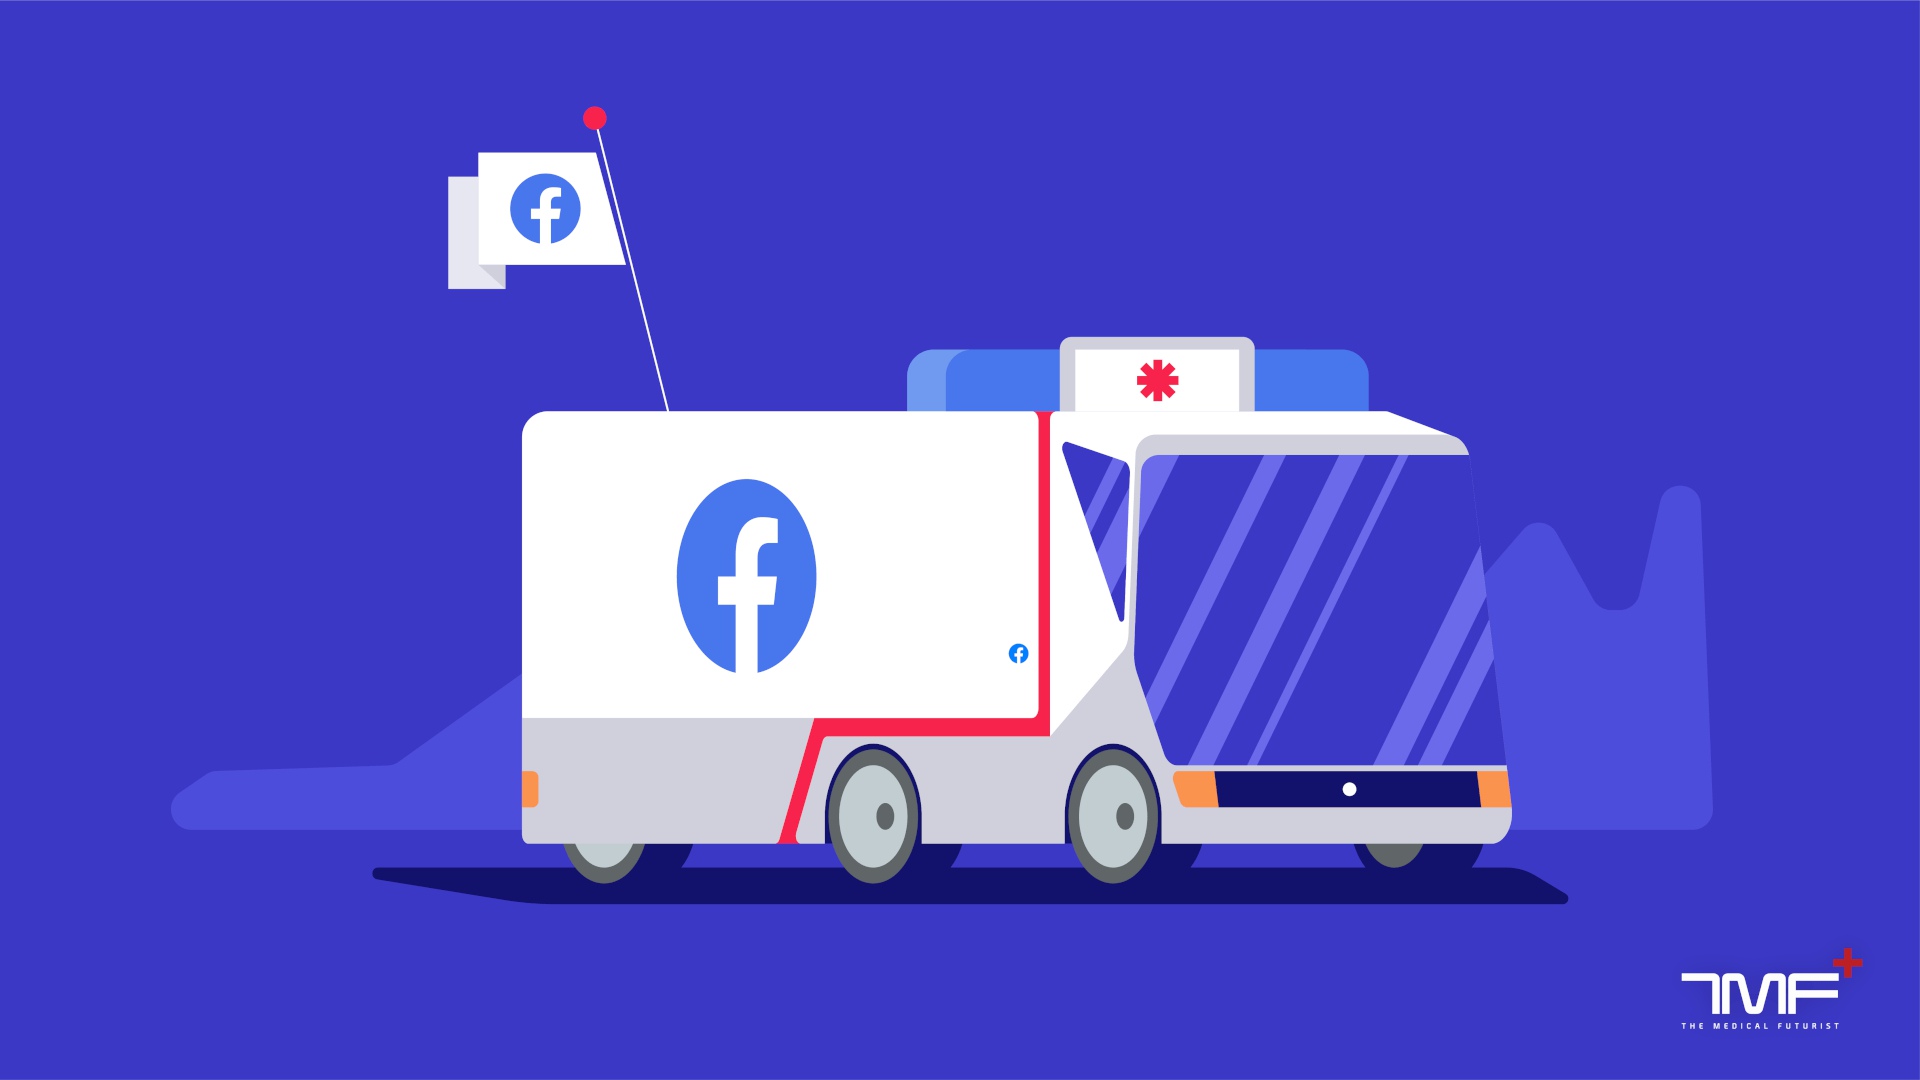 Is There A Place For Facebook In Healthcare?